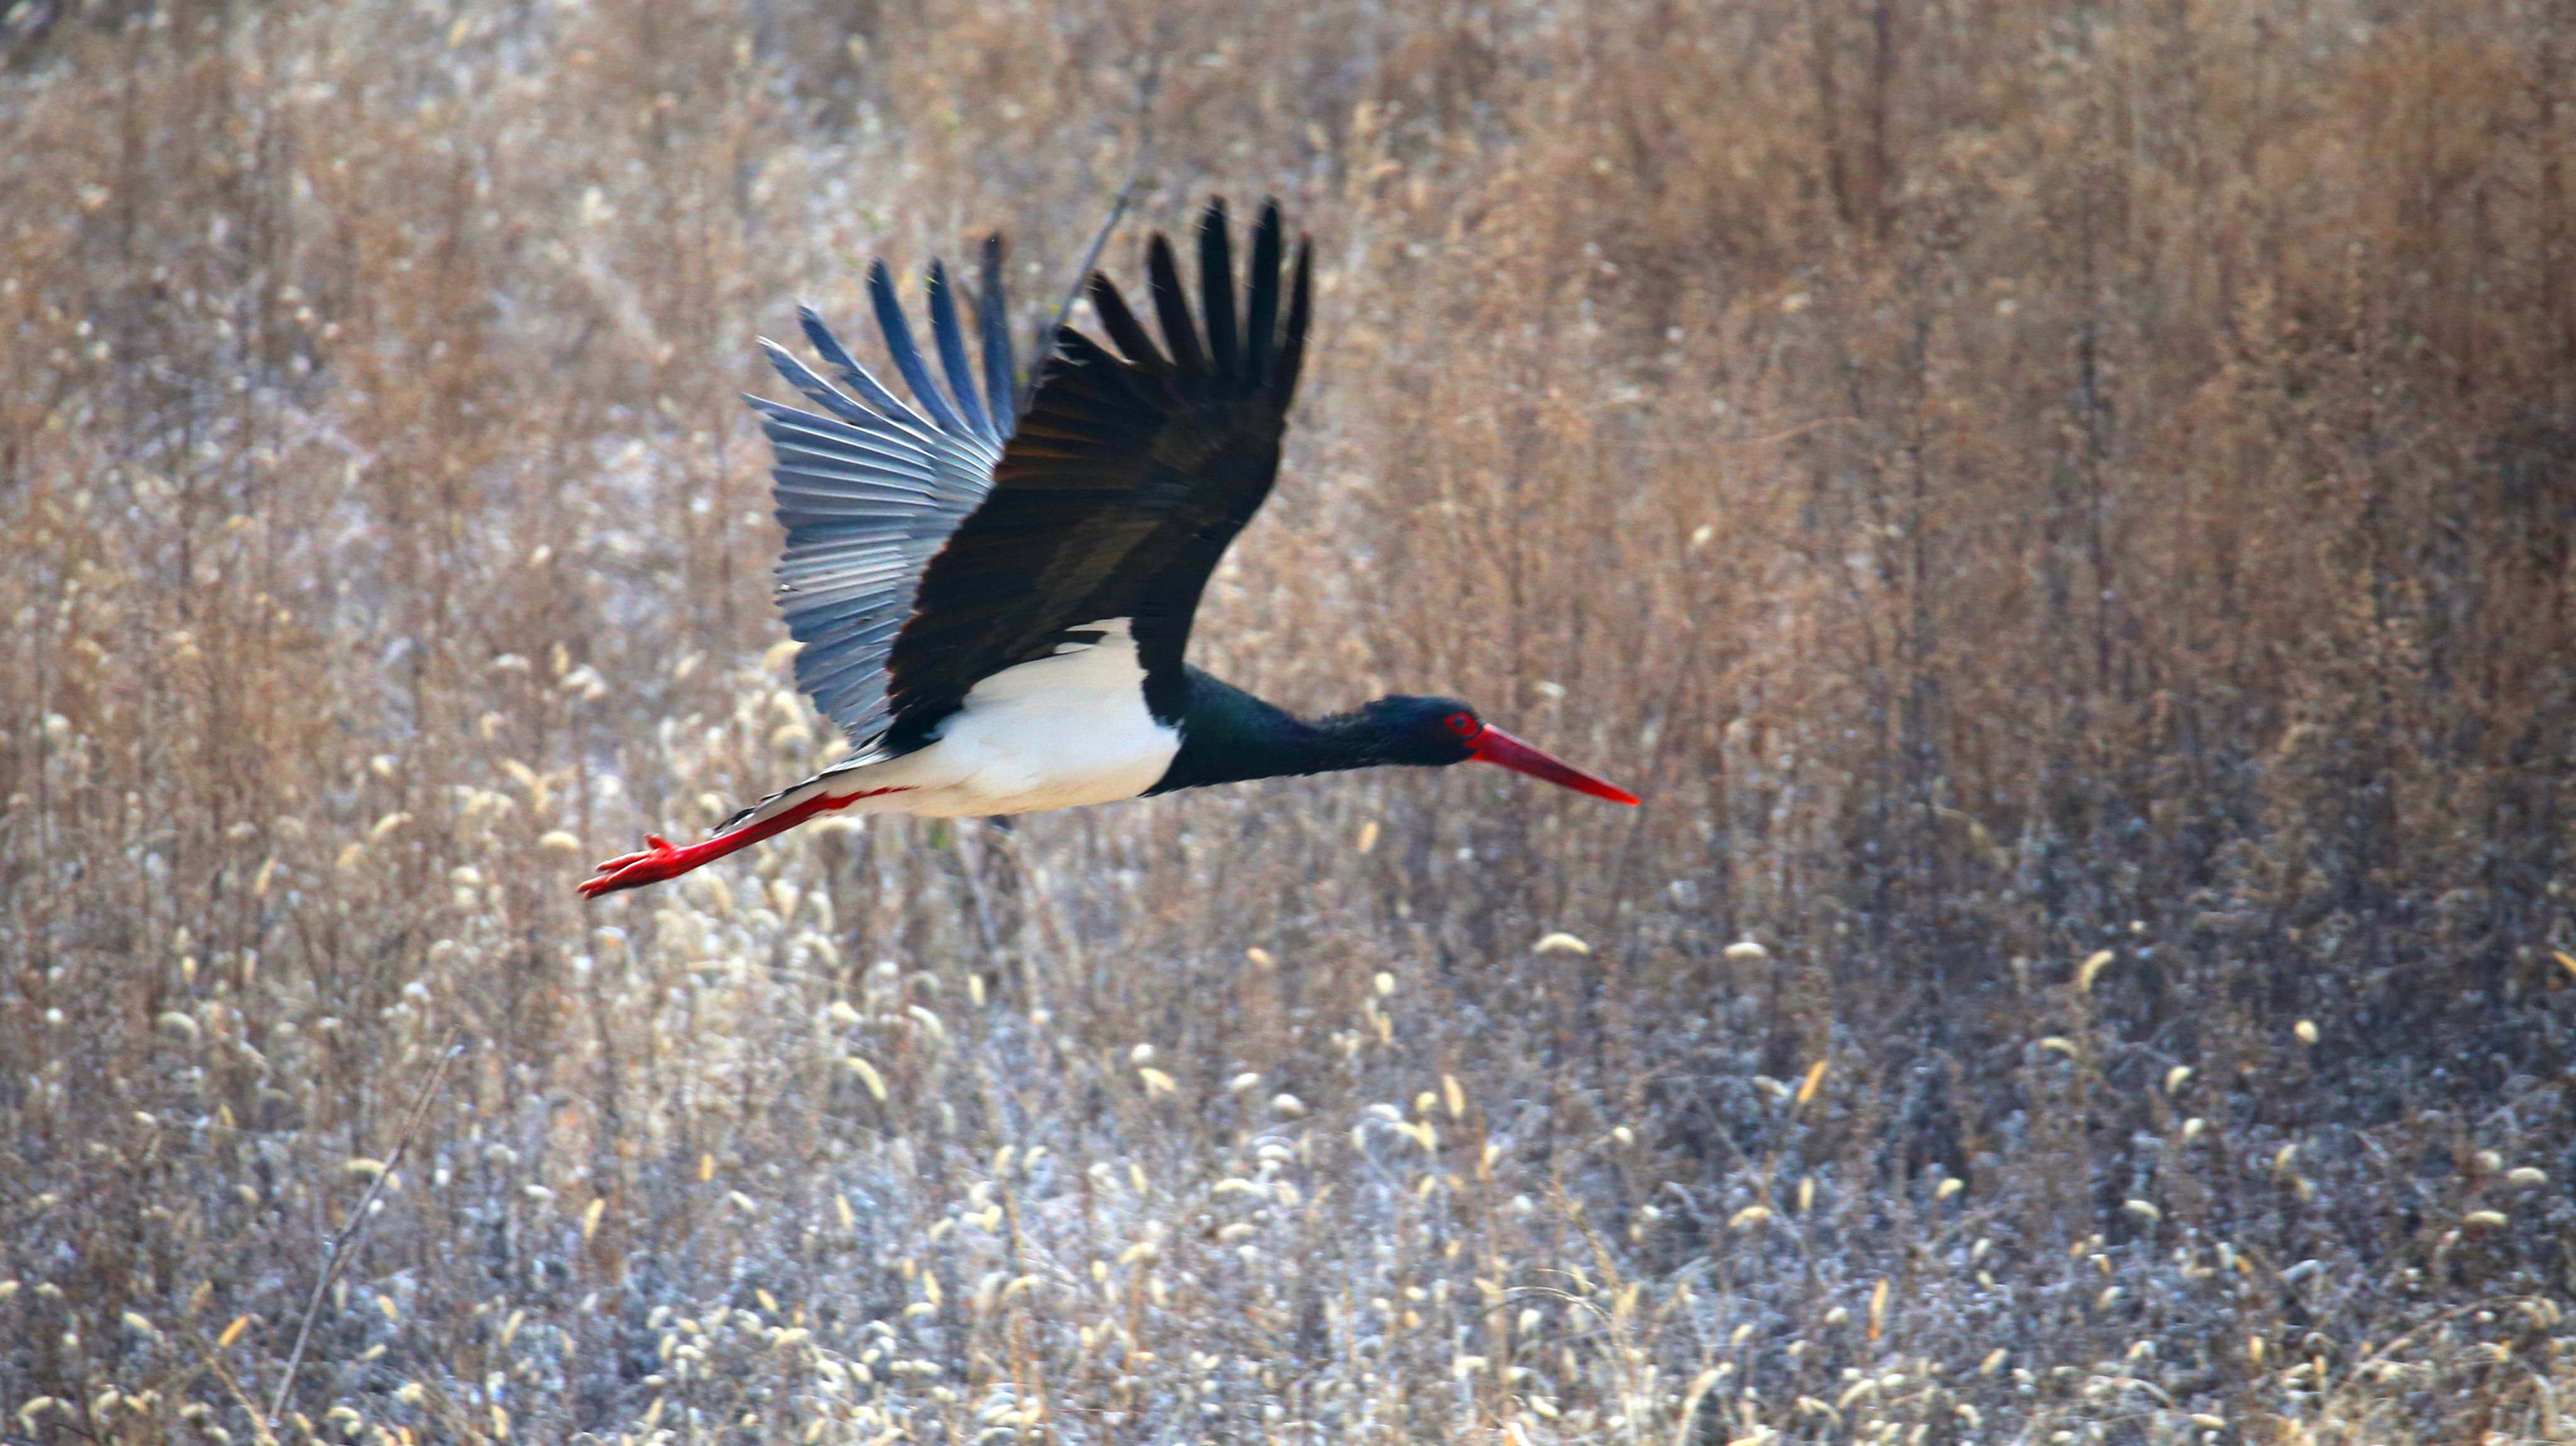 The first class national protected wild animal black storks are finding food in Beijing,China on 01th December, 2020